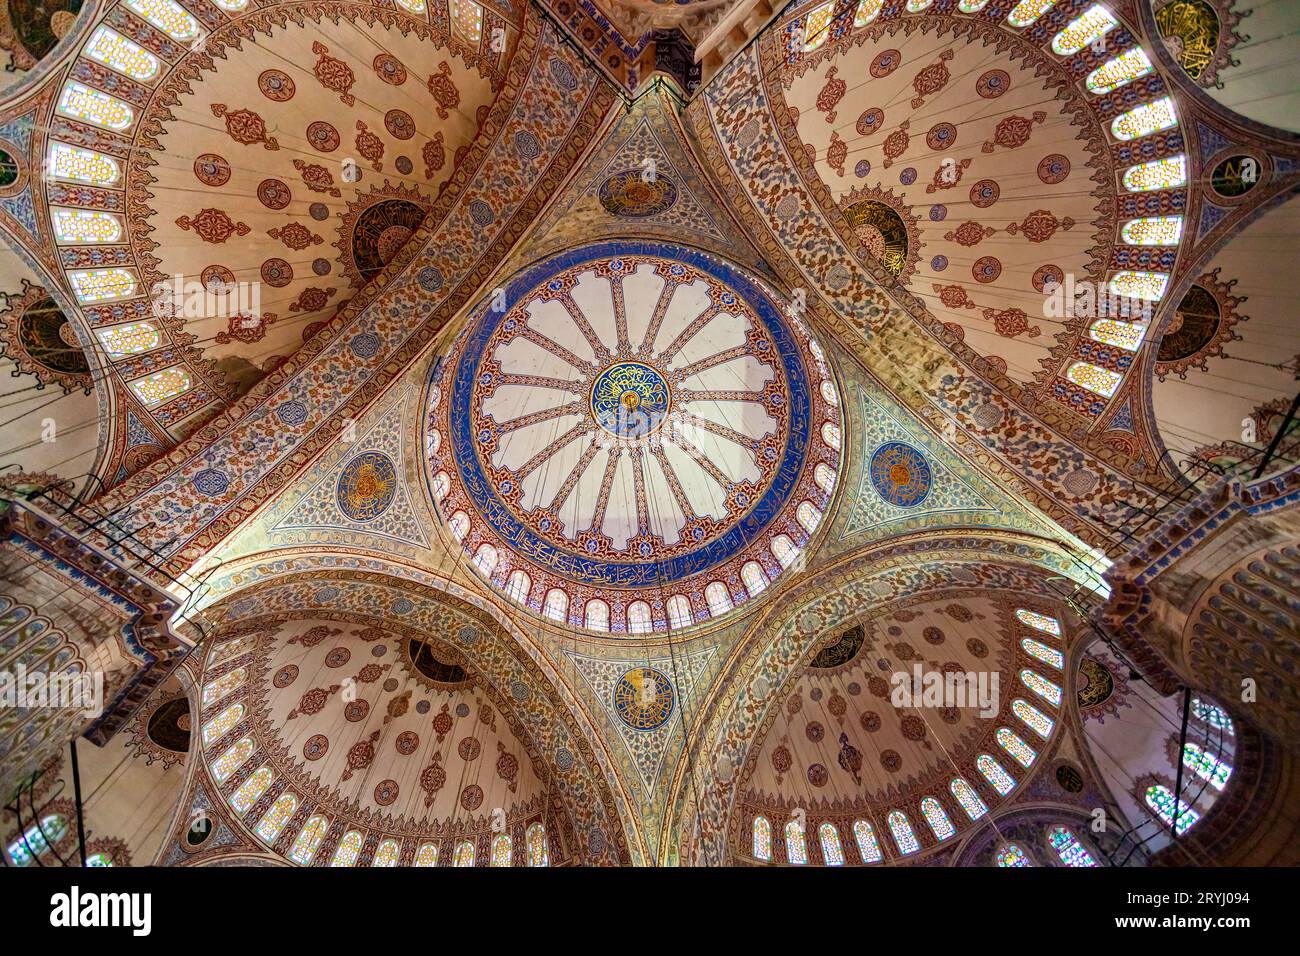 View of interior geometric painting at the ceiling of Blue Mosque in Istanbul. Stock Photo